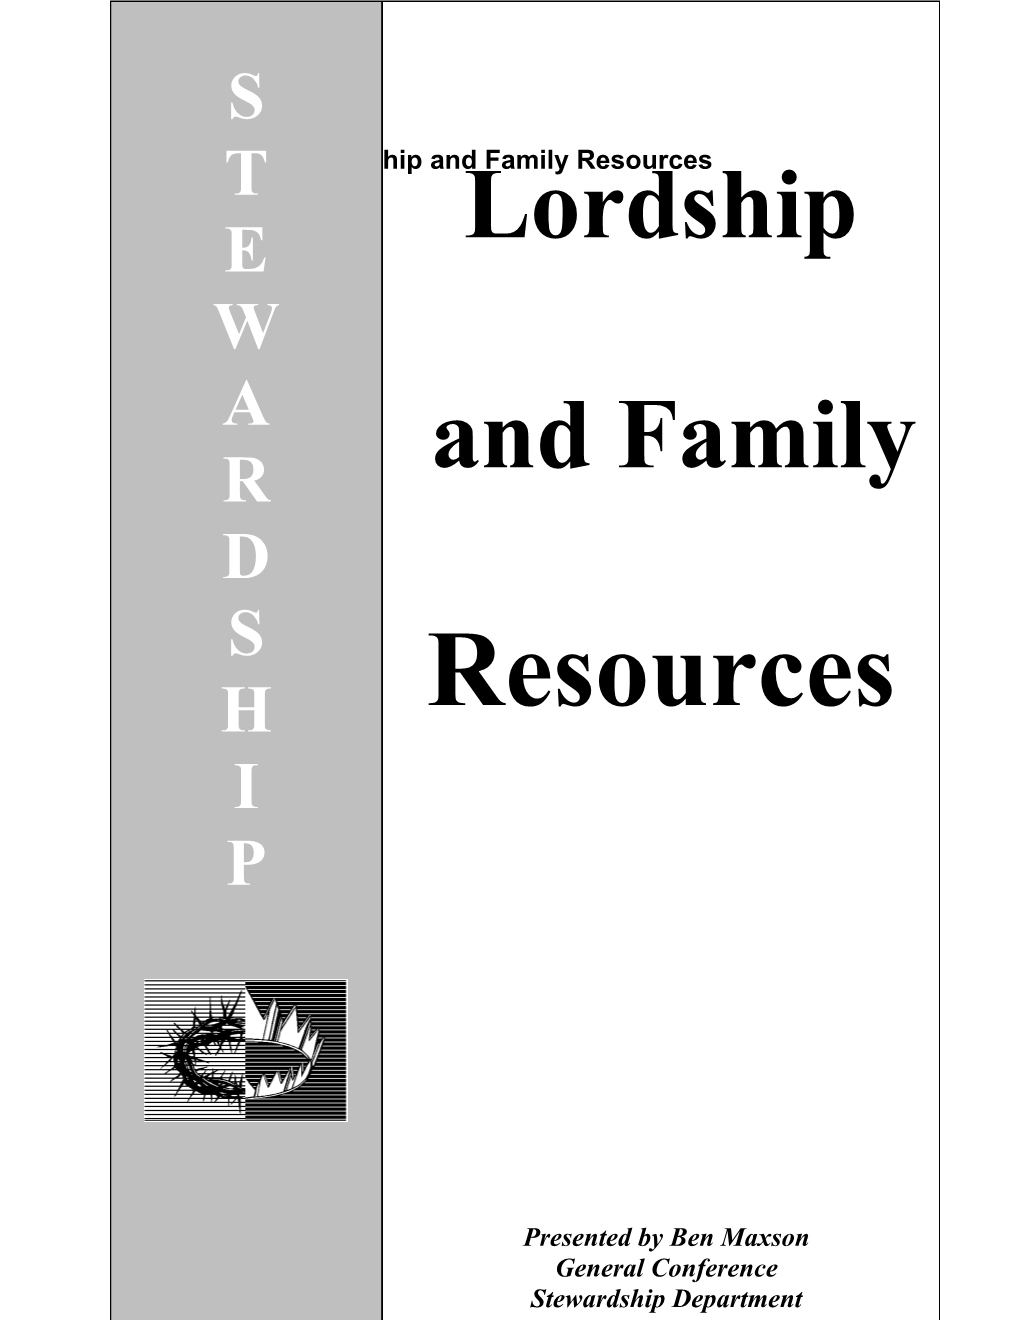 Lordship and Family Resources